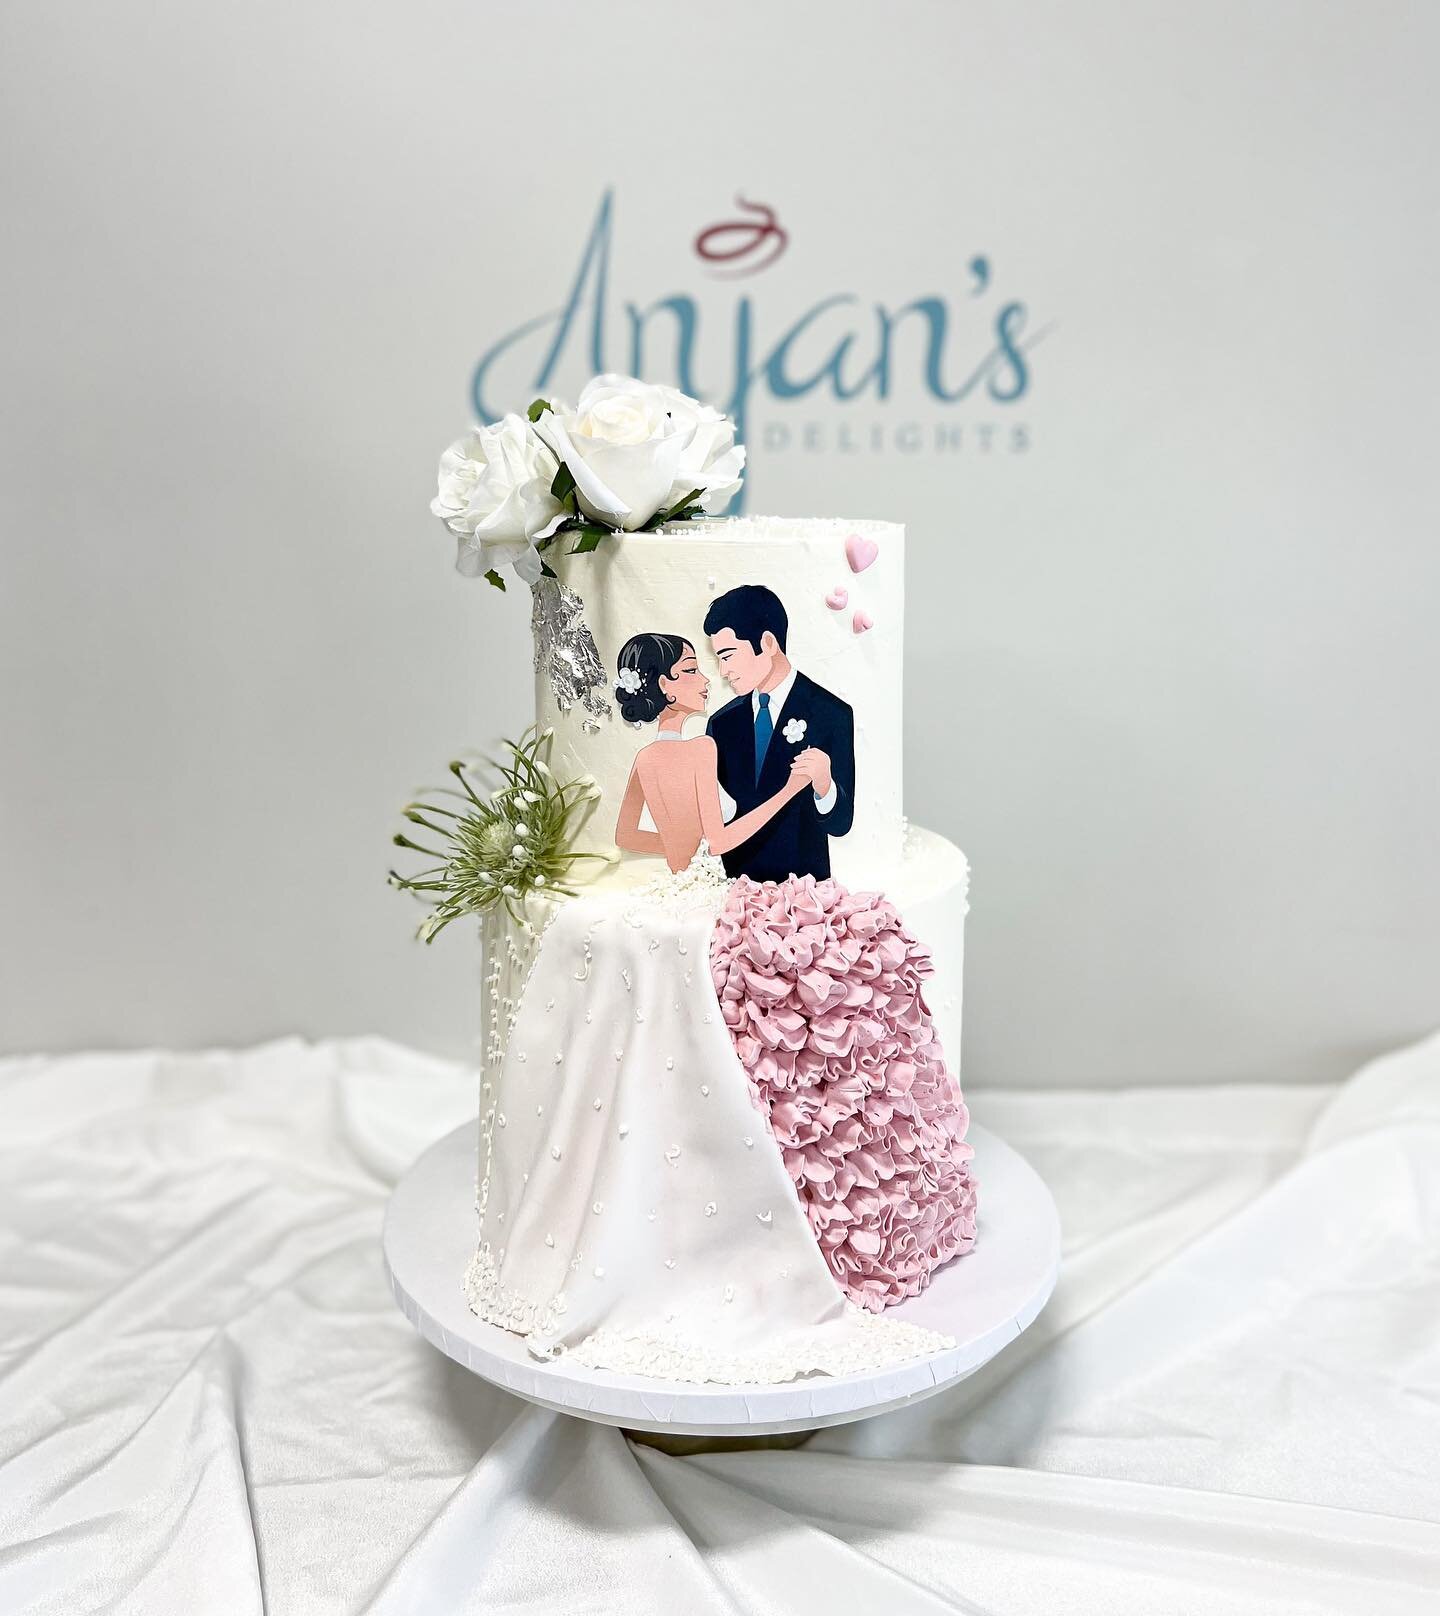 Officially one of my Favourite engagement cakes. We can customize the couple&rsquo;s picture with your image as well. How cute is this cake? 🍰💕
*
*⁣⁣⁣⁣⁣
*⁣⁣⁣⁣⁣
#cakesbyanjan #anjansdelights #anjansbridalshowercakes #anjansweddingcakes #surreycakes 